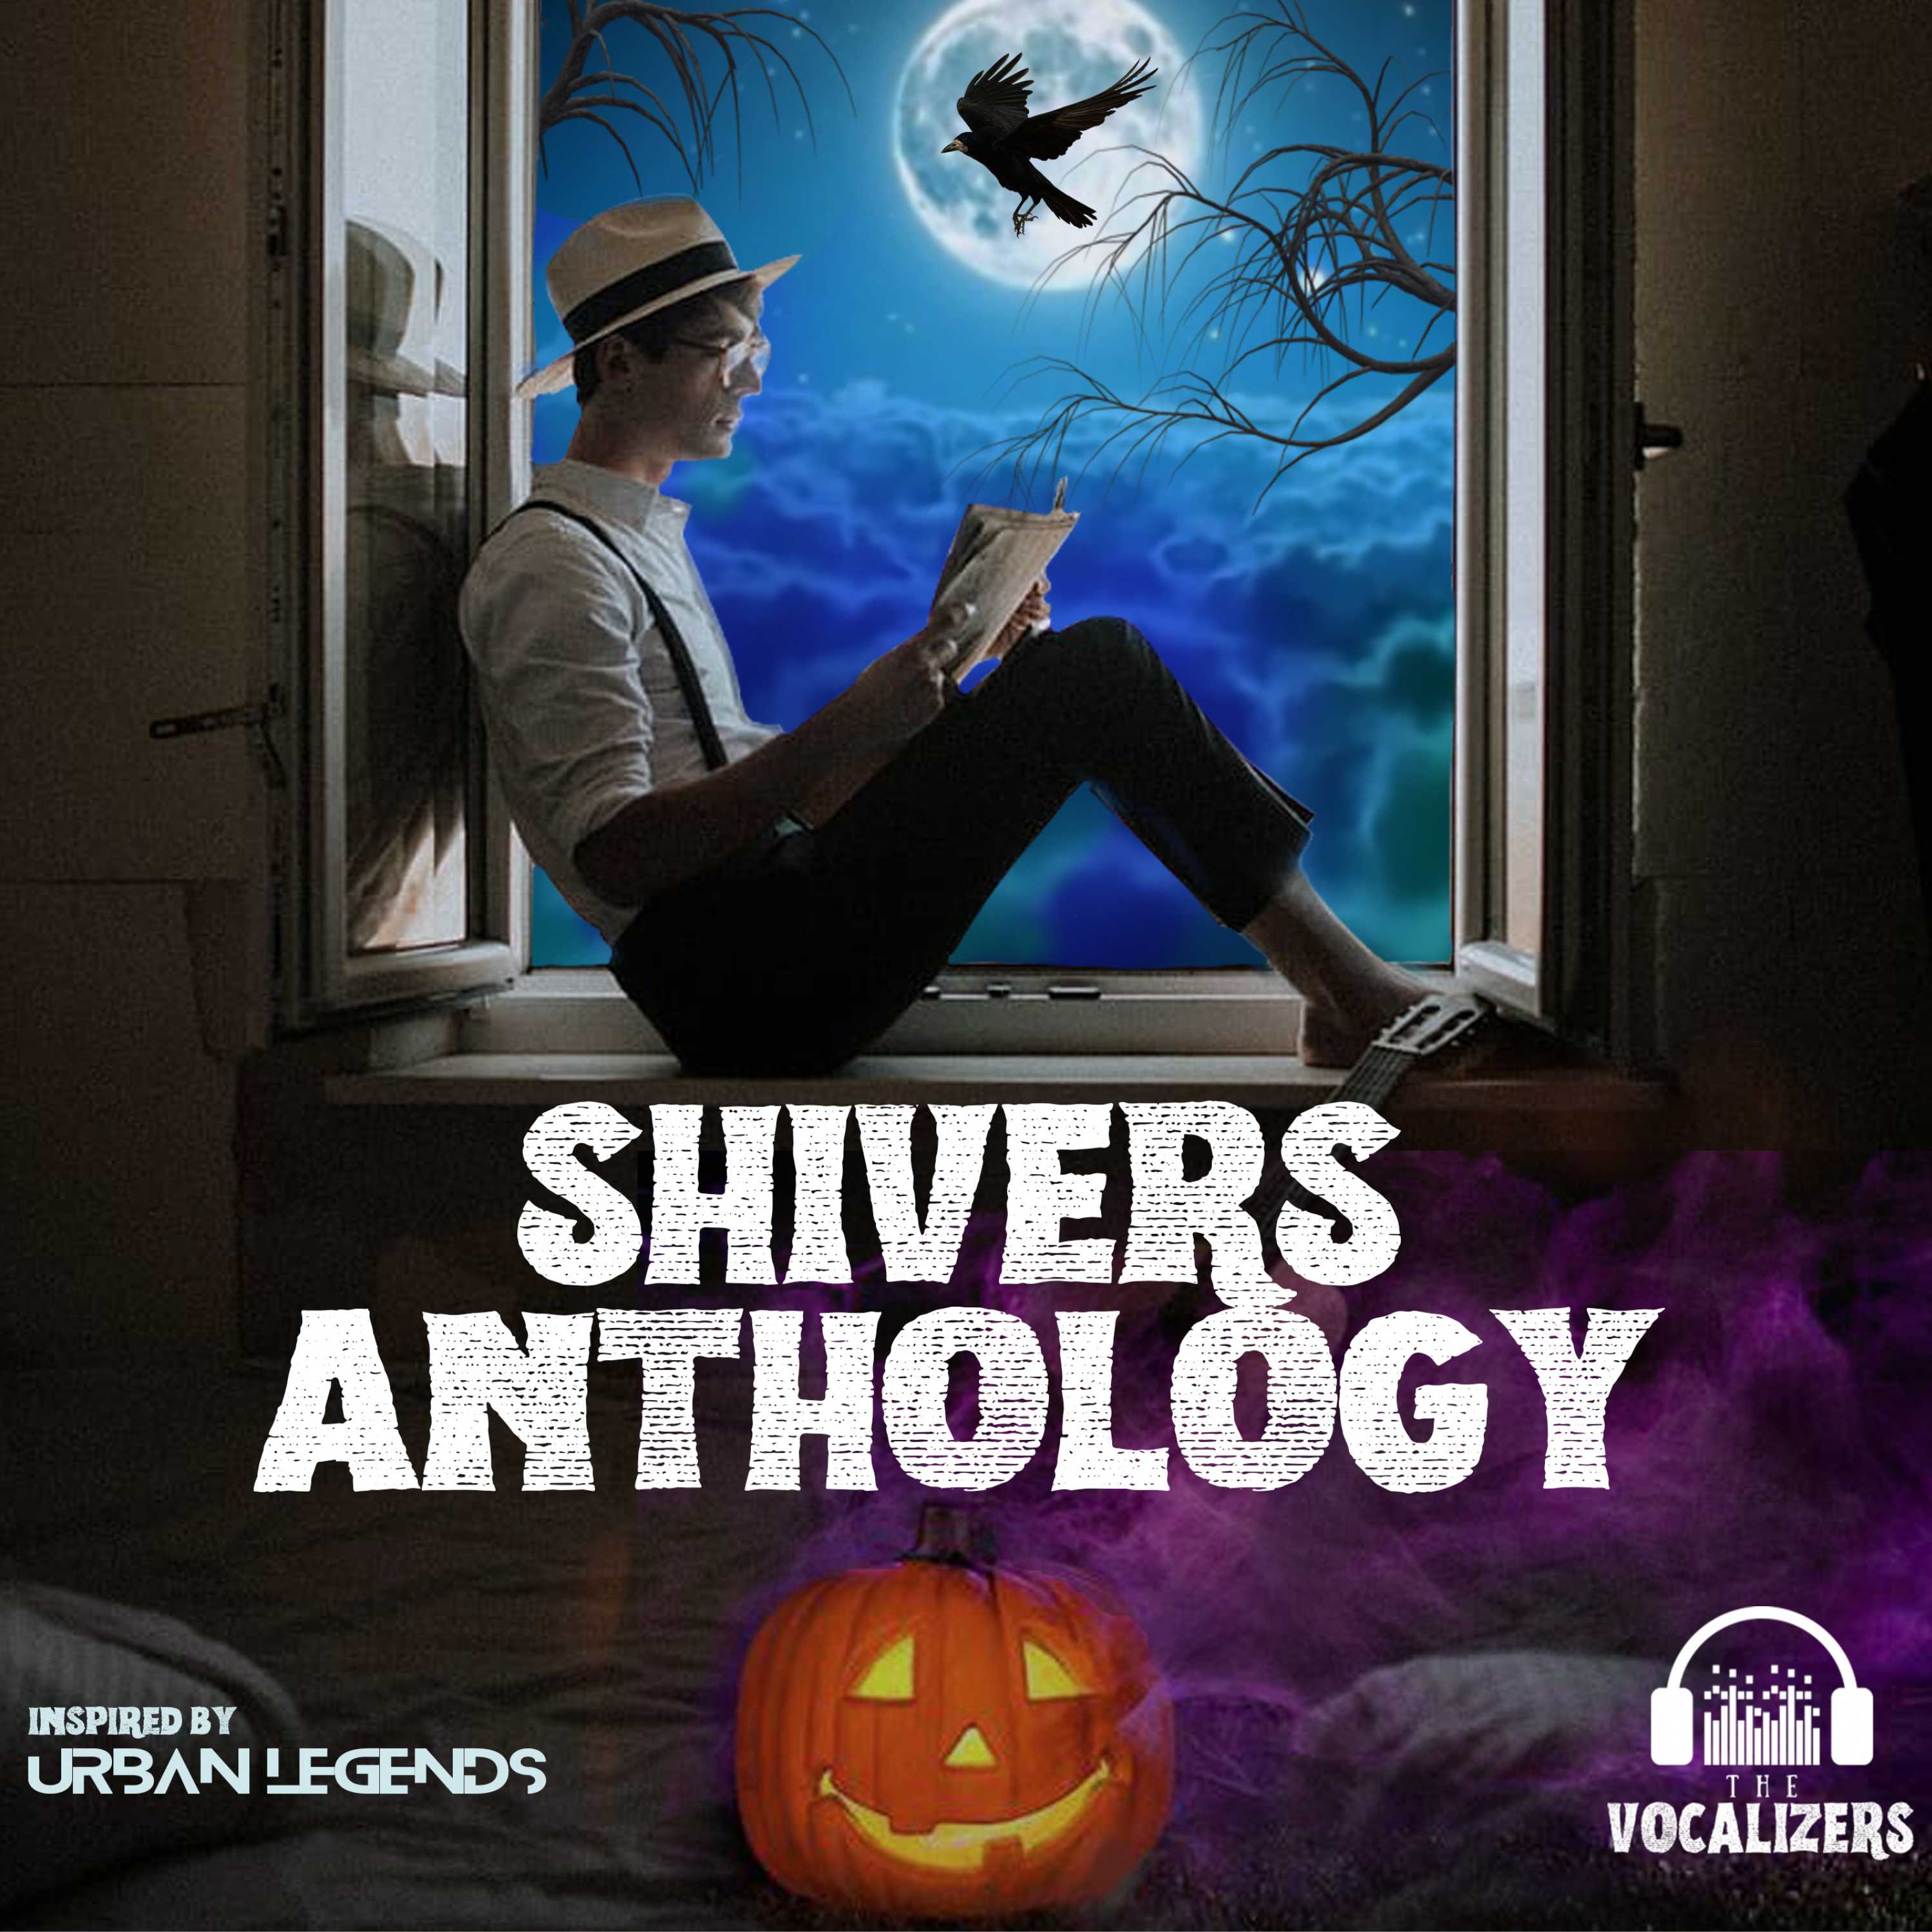 Show artwork for SHIVERS ANTHOLOGY